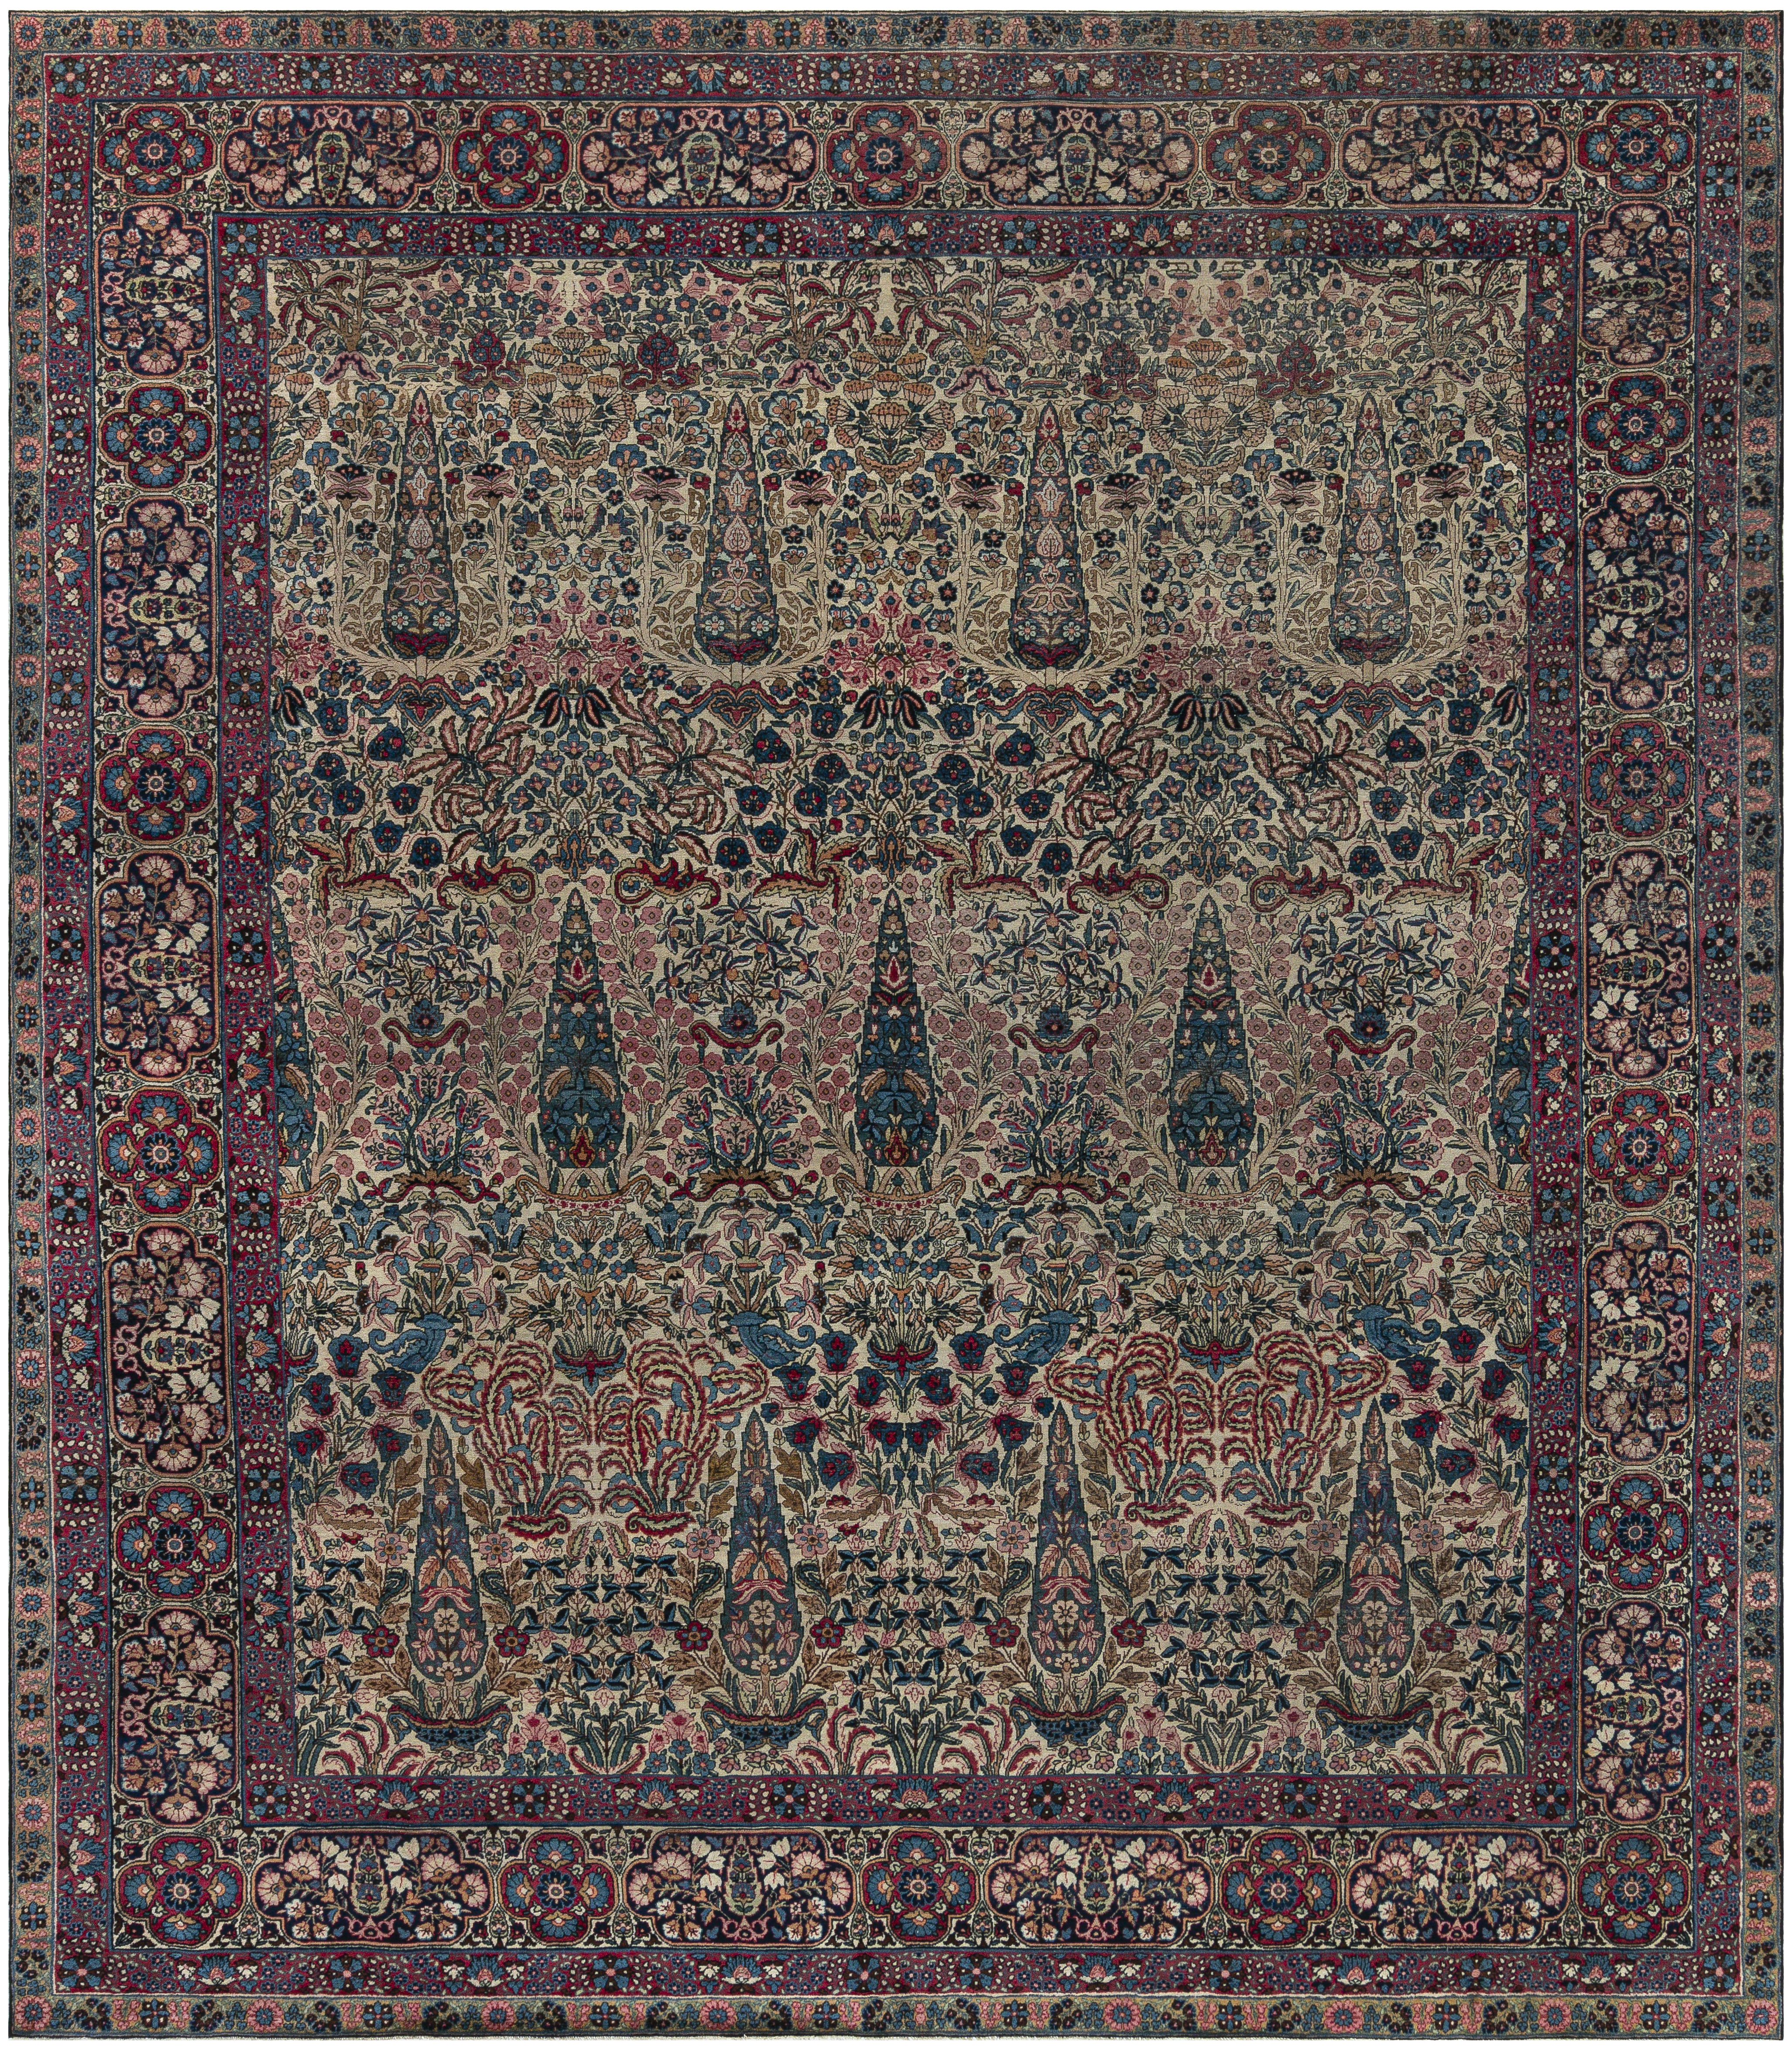 Early 20th Century Persian Kirman Wool Rug in Blue, Brown, Green, Pink and Red BB7345